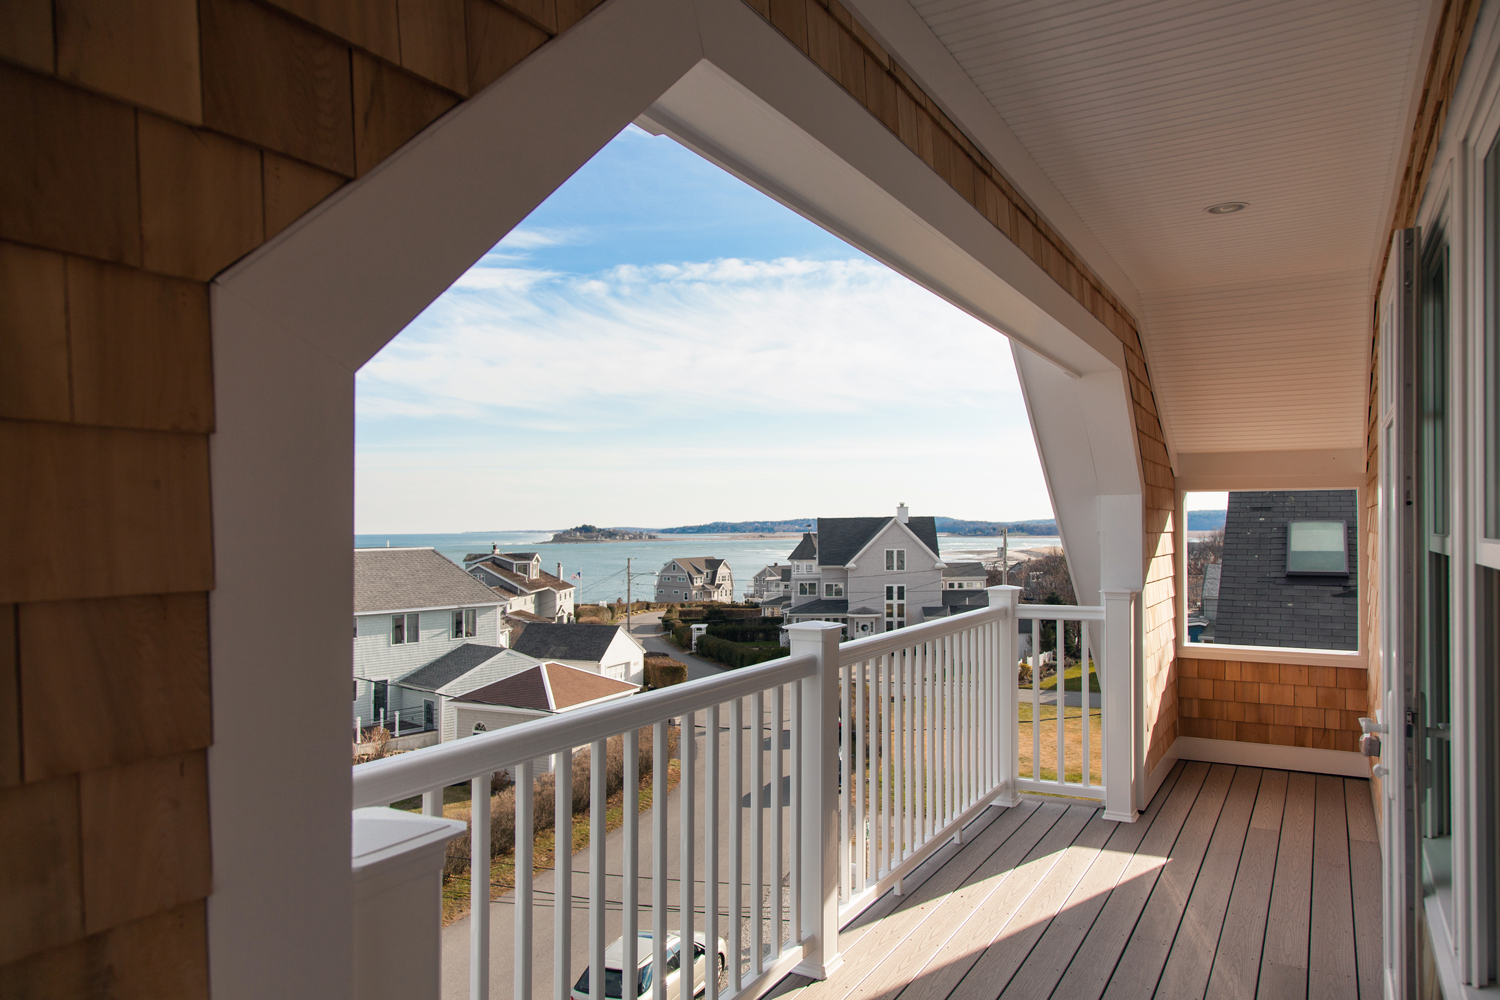 scituate_roof deck.jpg